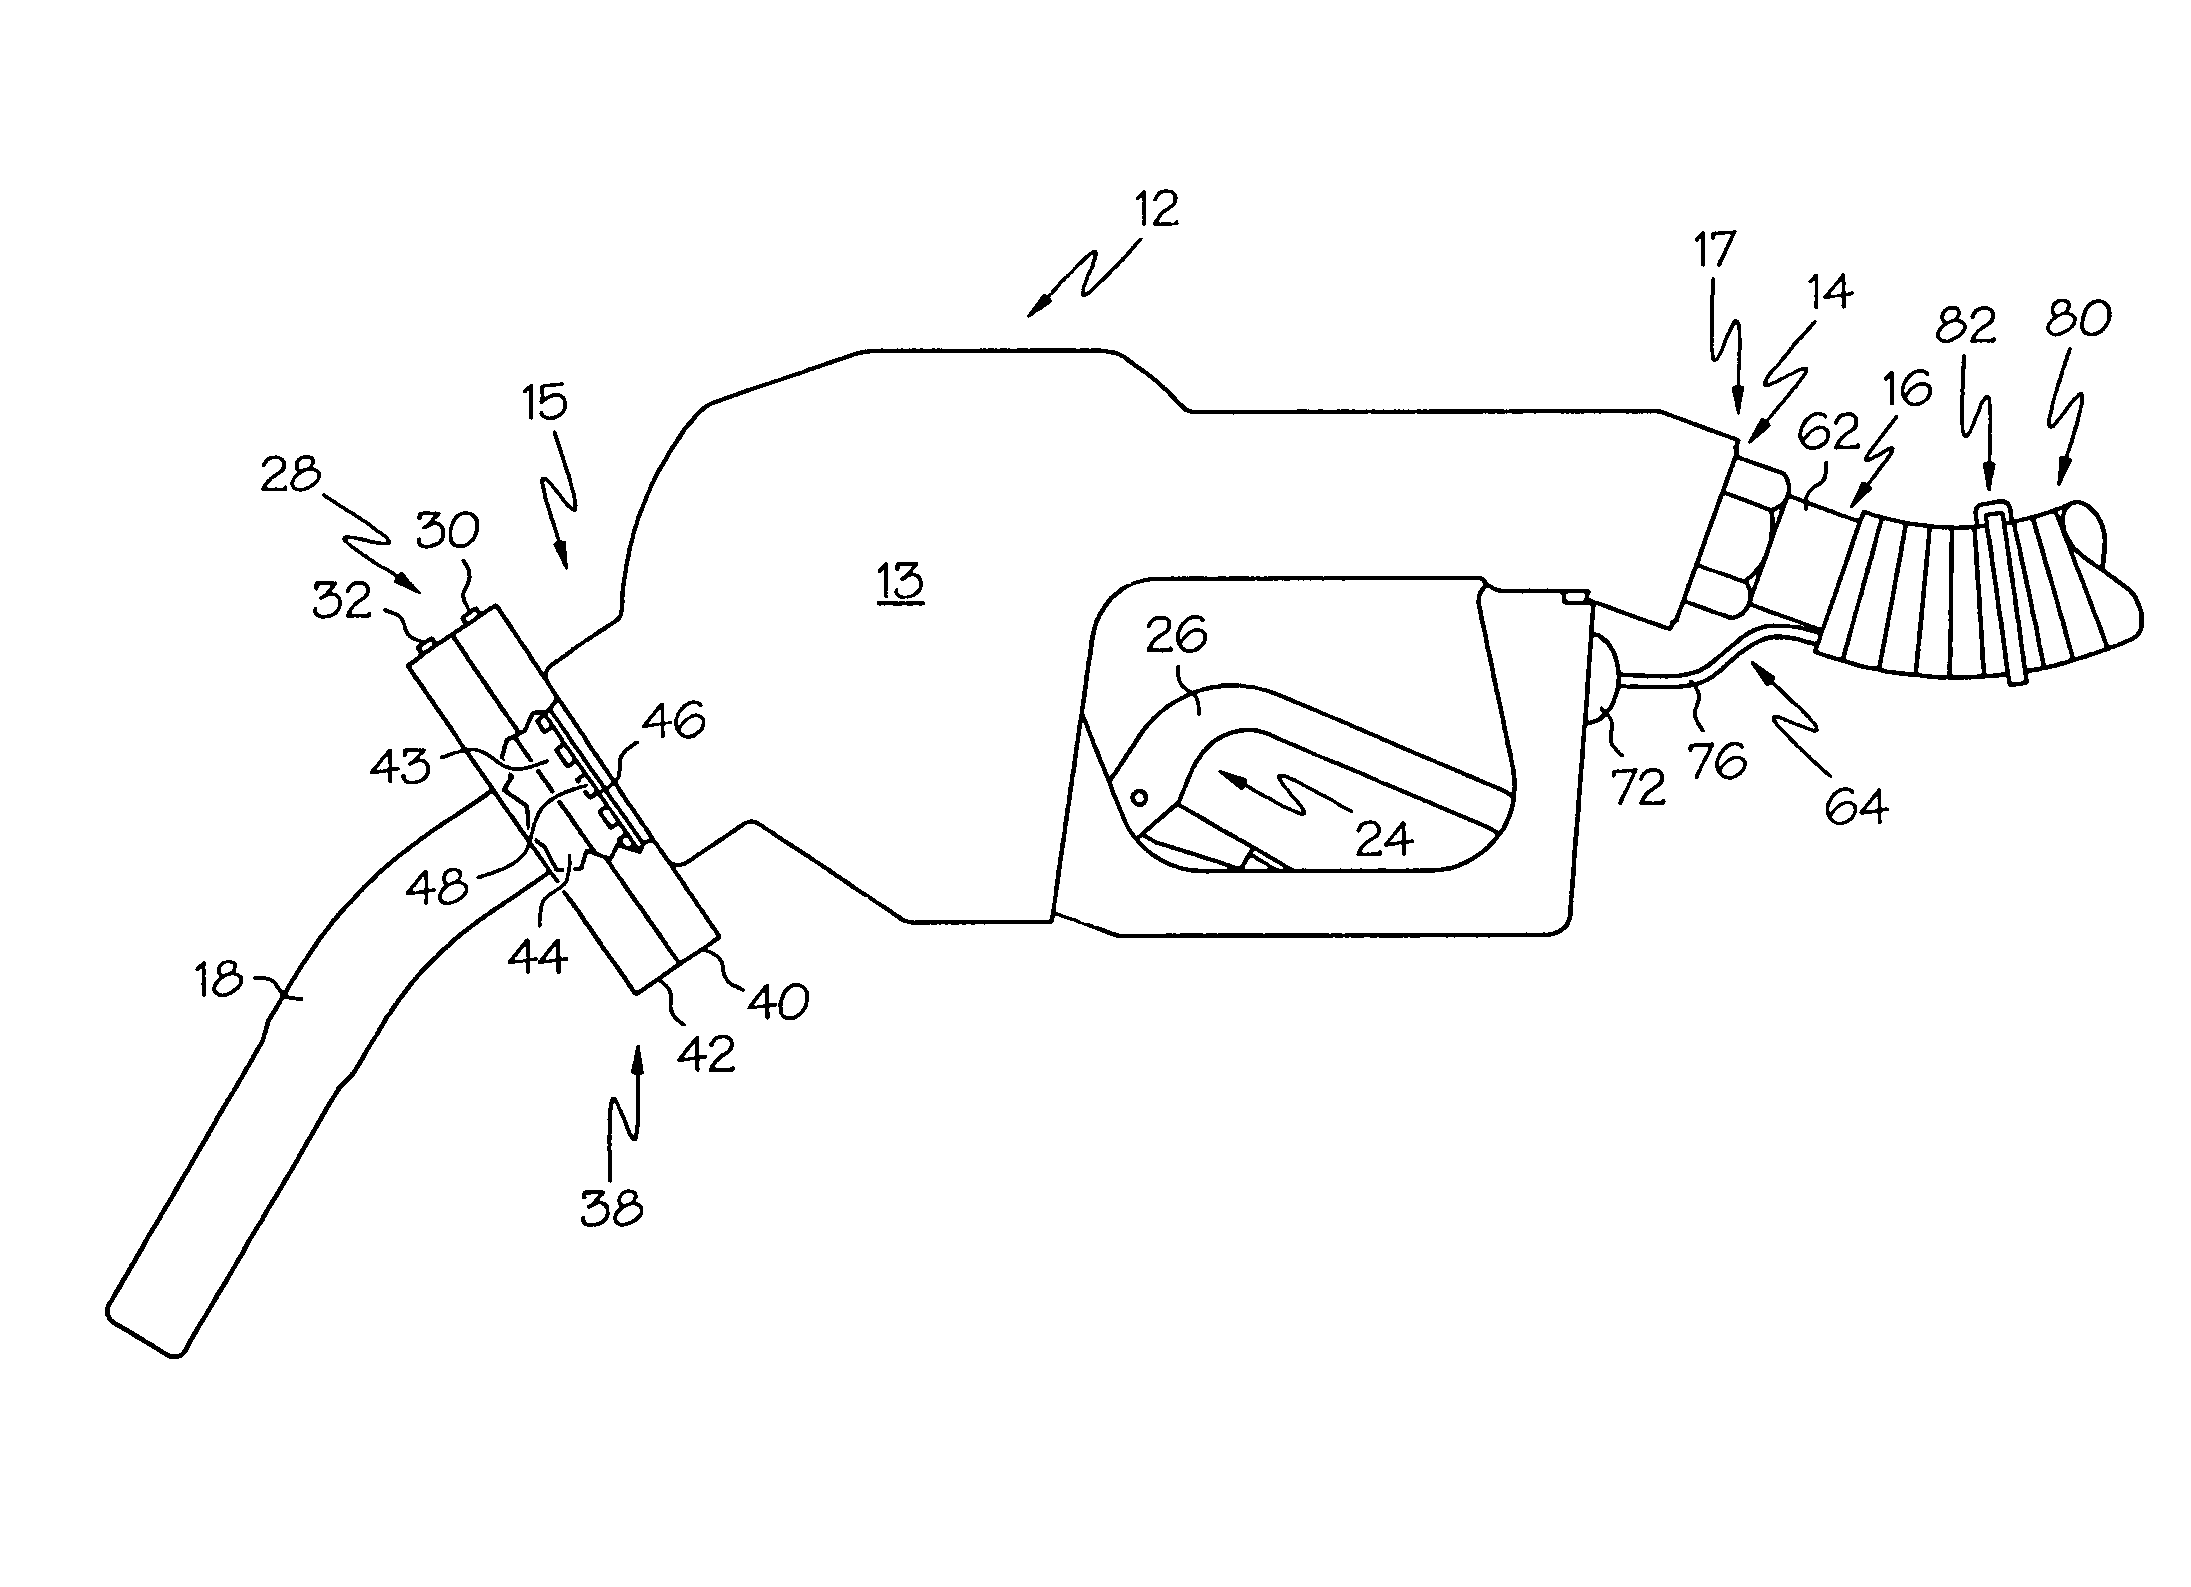 Lighted supervisory system for a fuel dispensing nozzle